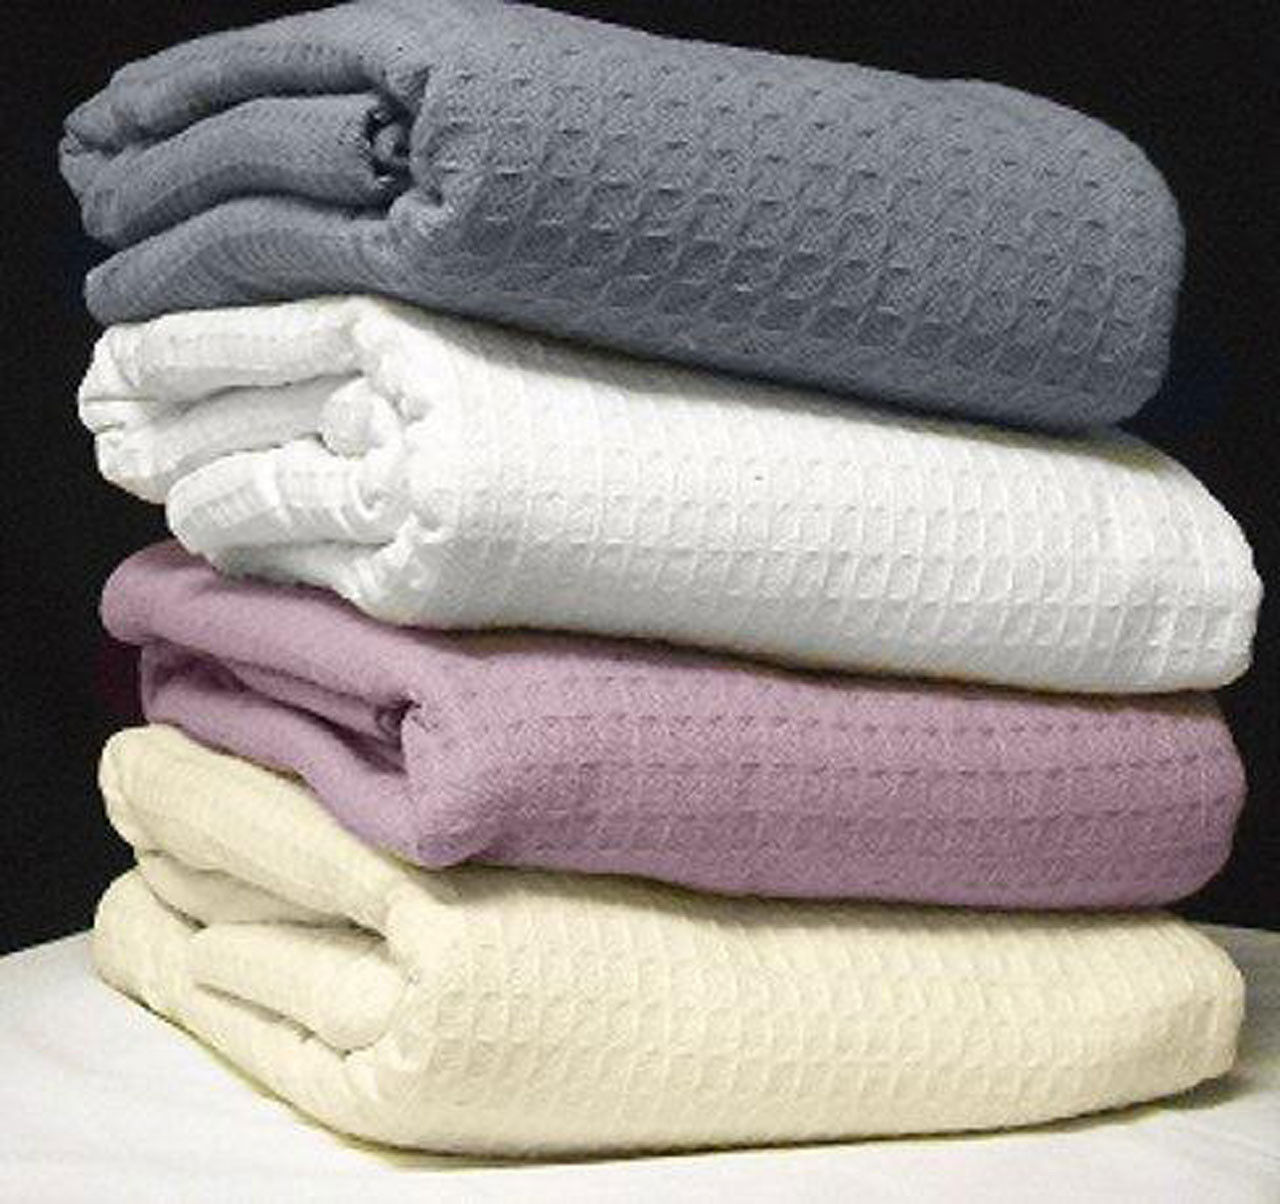 How is the appearance of the Santa Clara Cotton Thermal Blanket described?